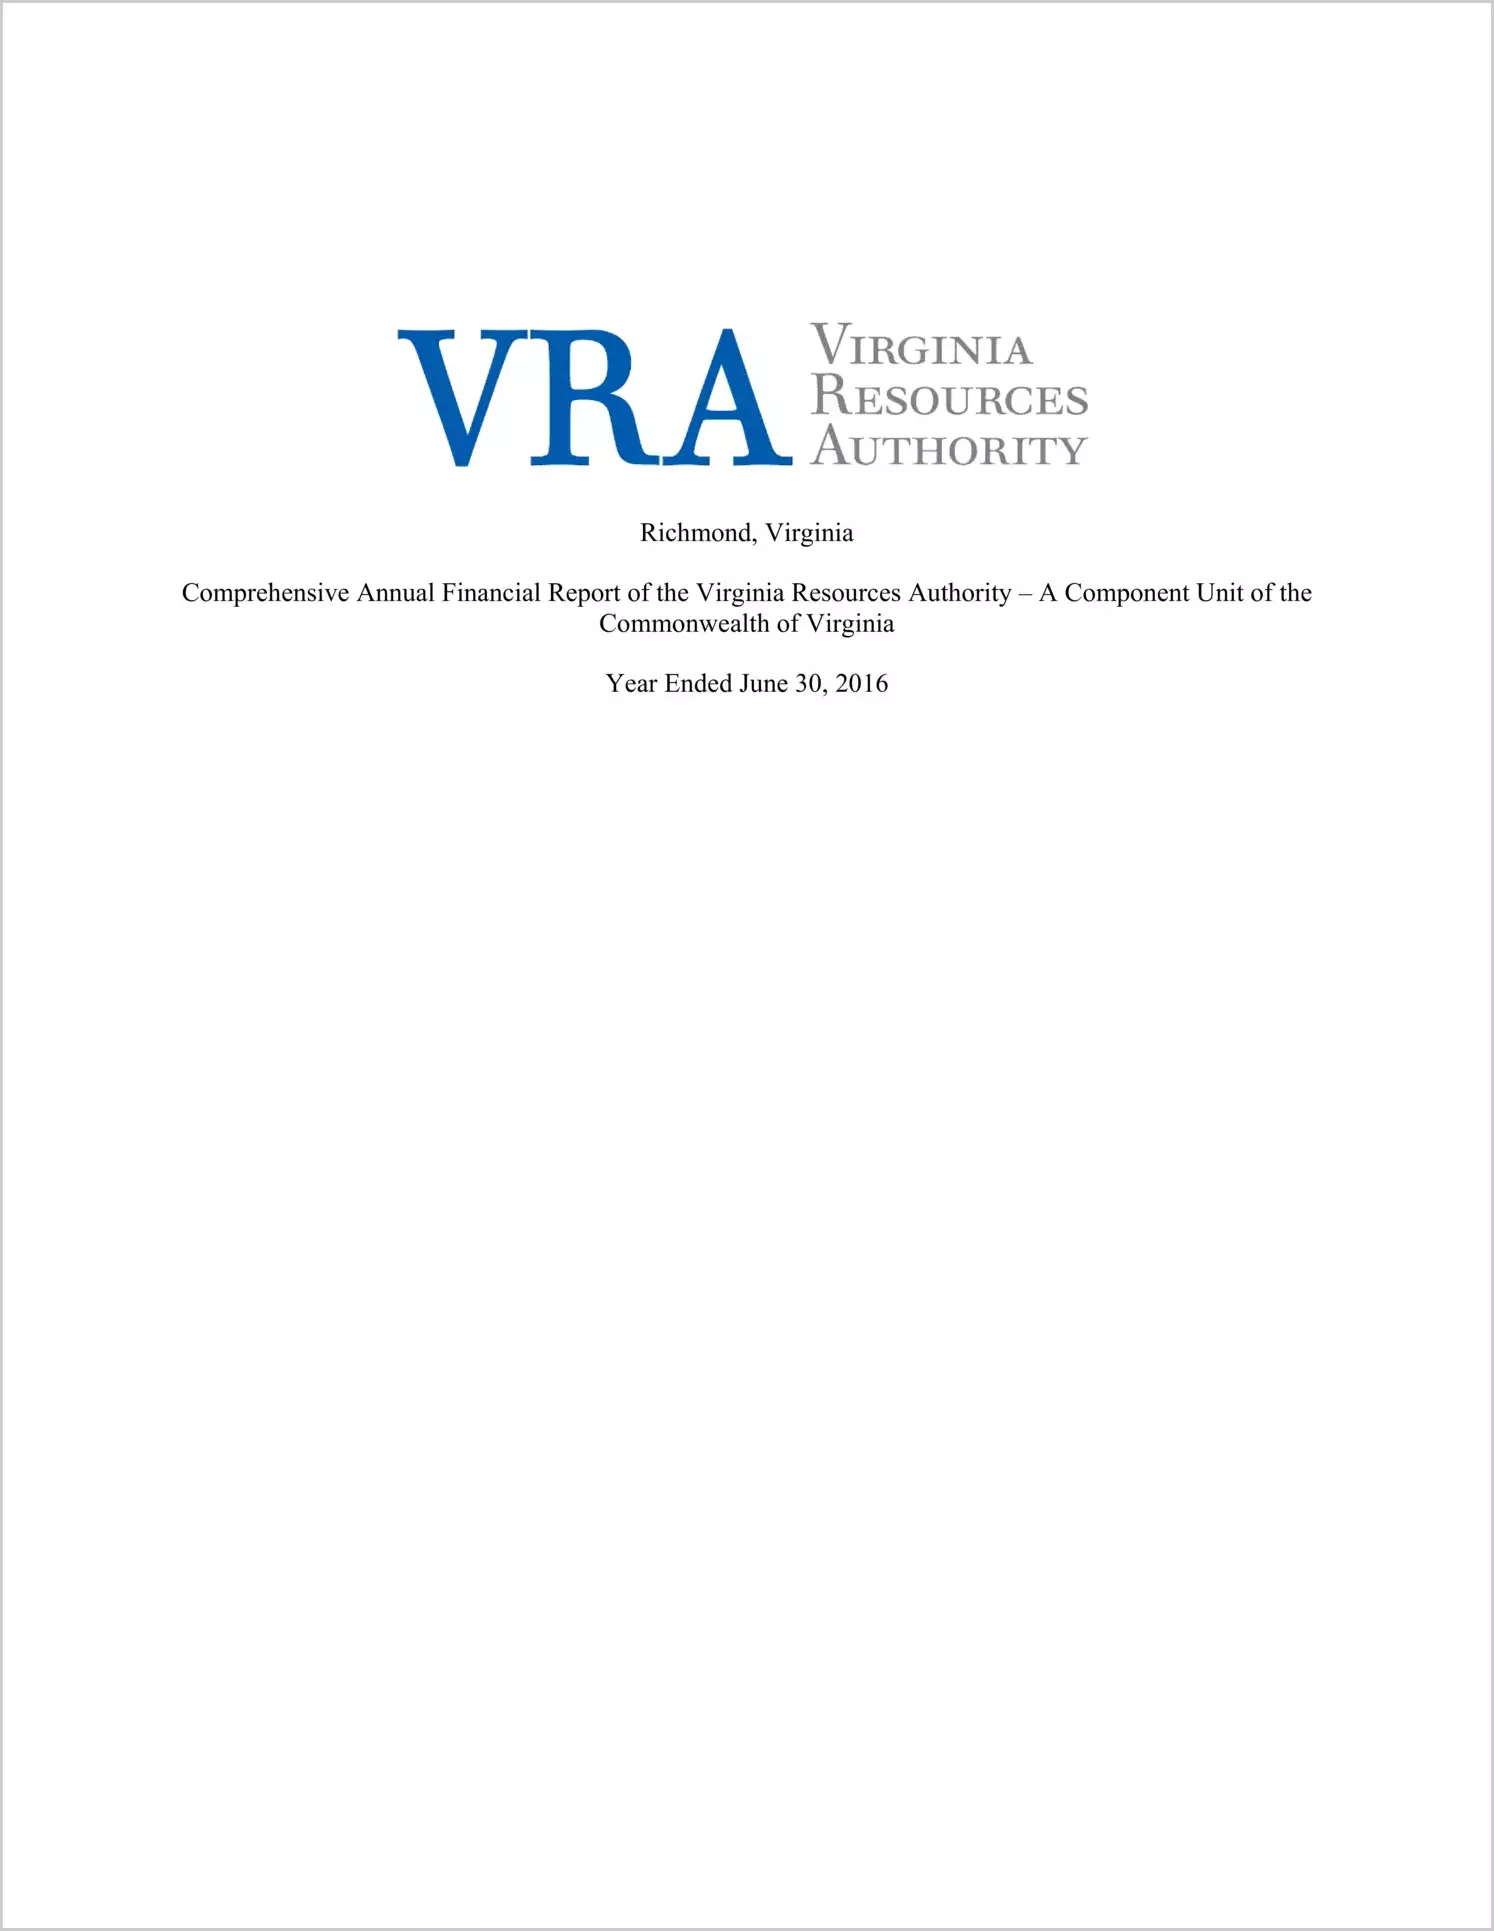 Virginia Resources Authority Financial Statements for the fiscal year ended June 30, 2016